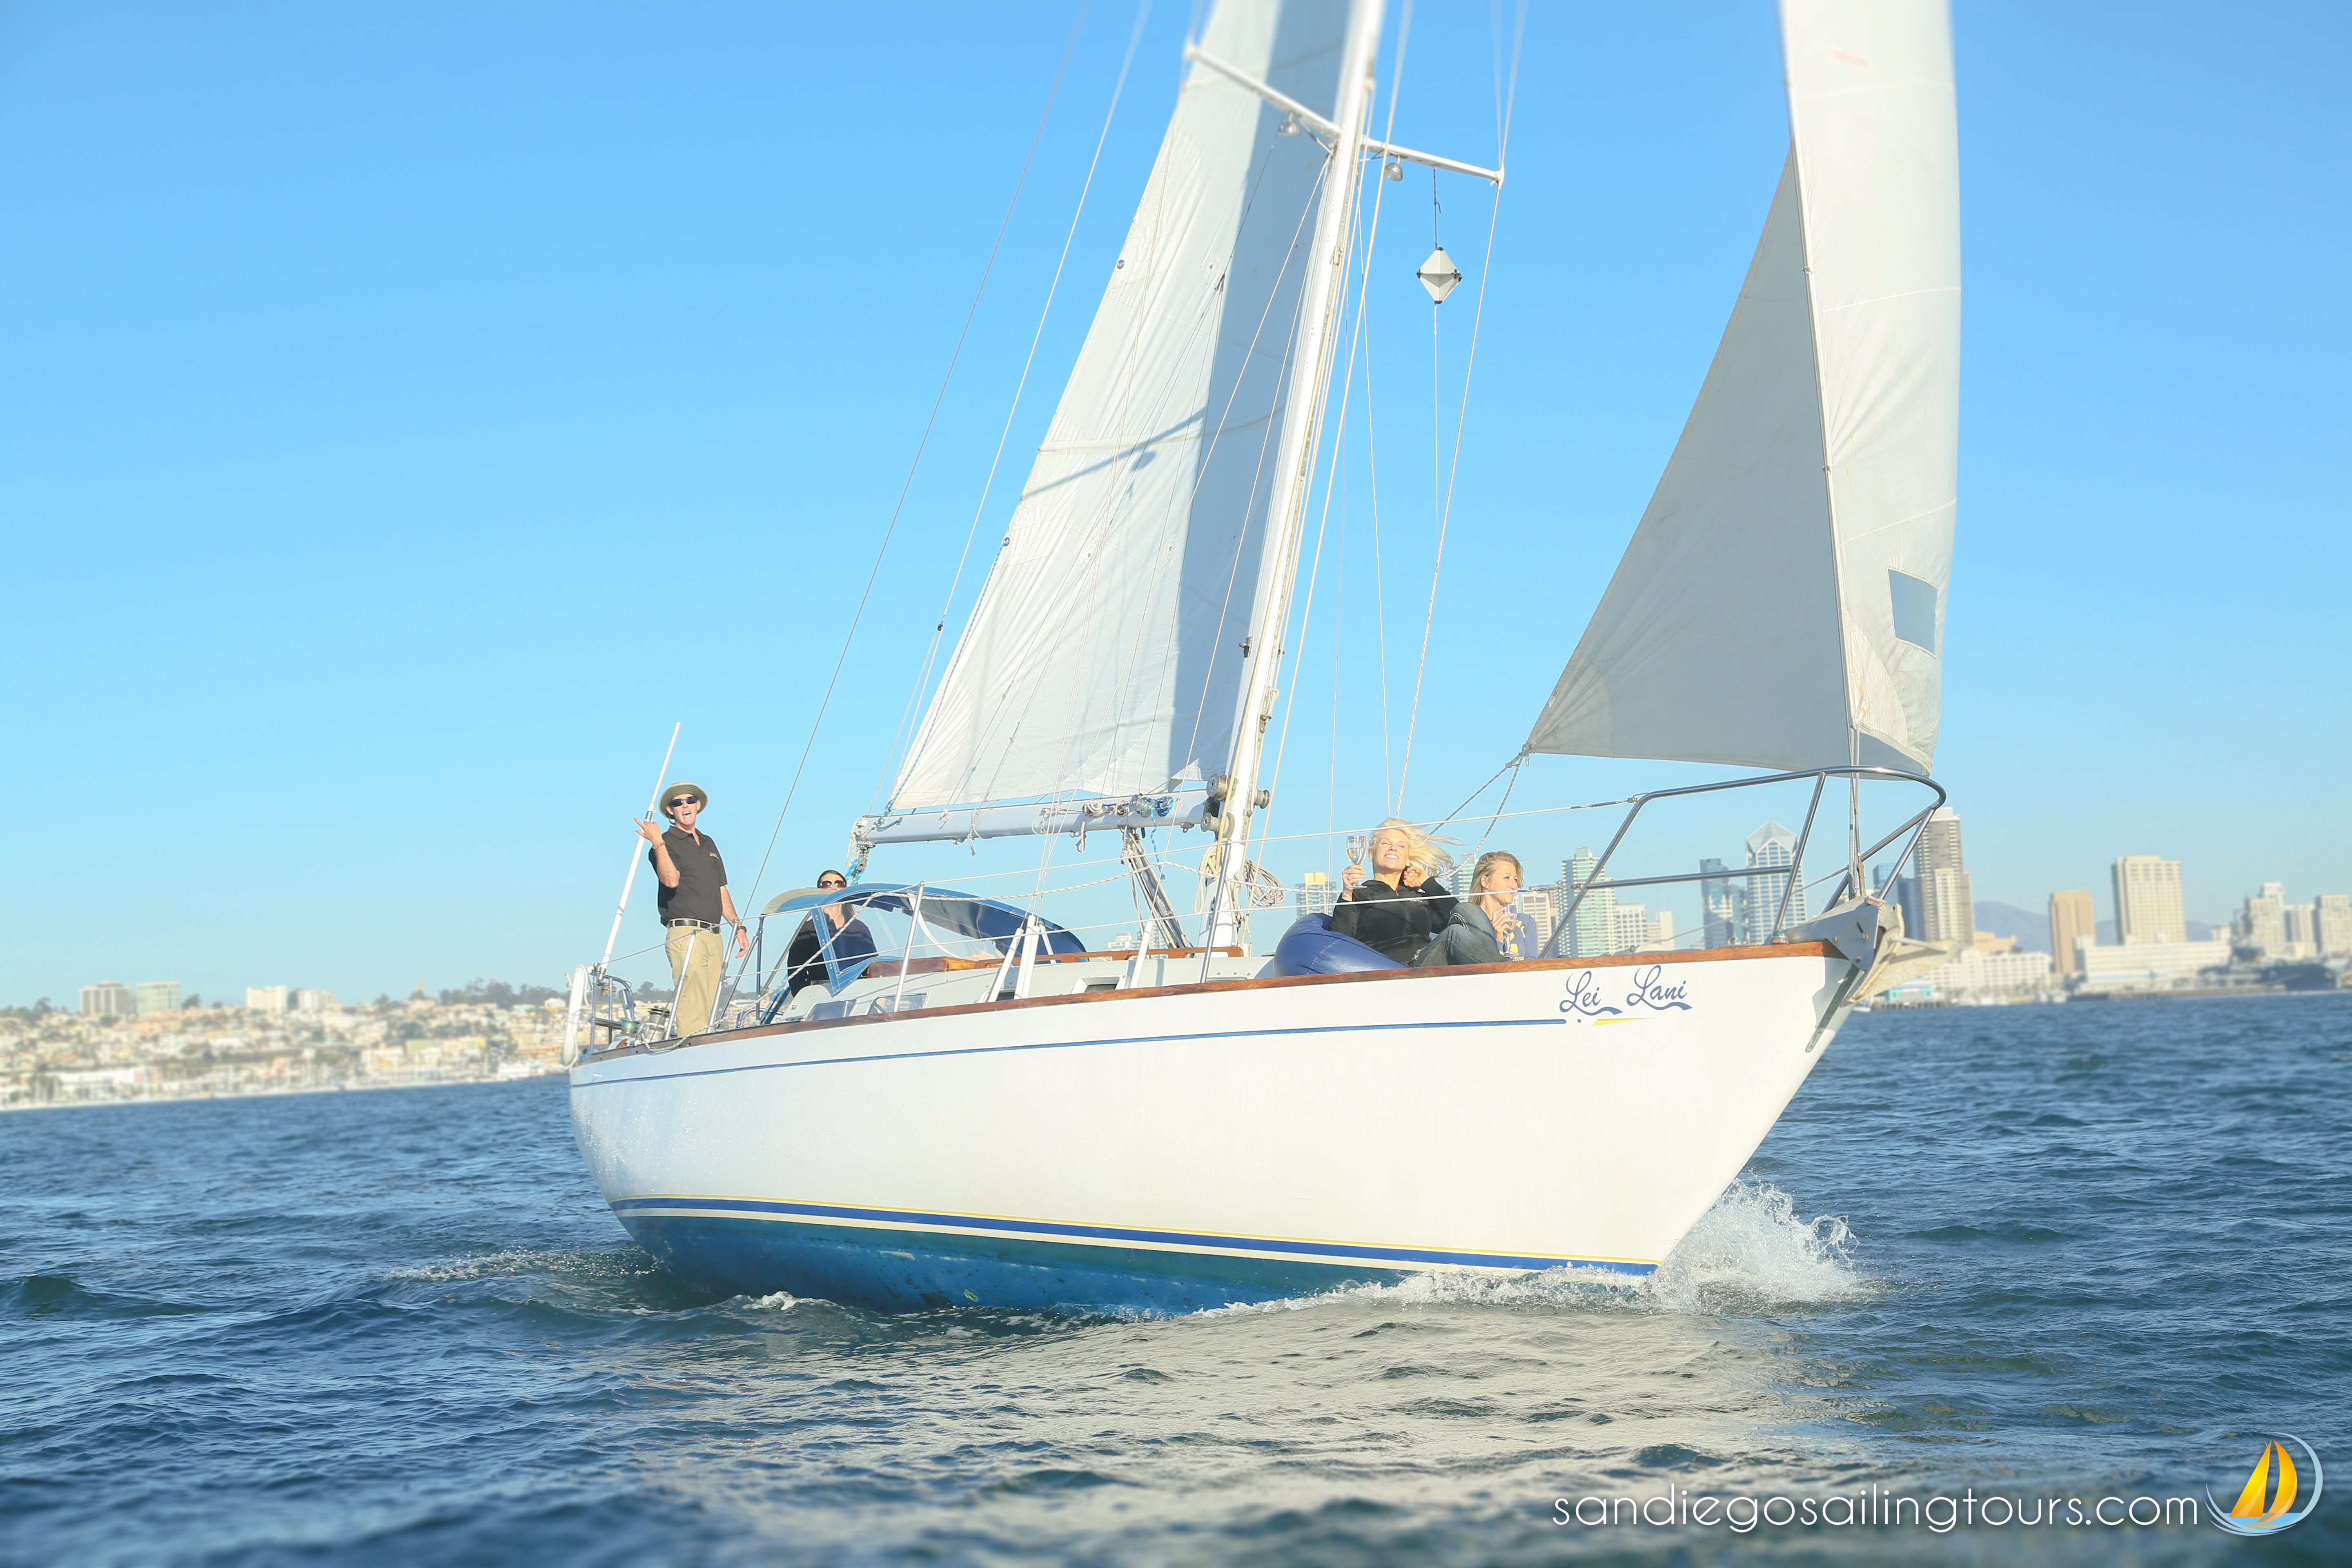 Sailing The Bay in Style This Summer